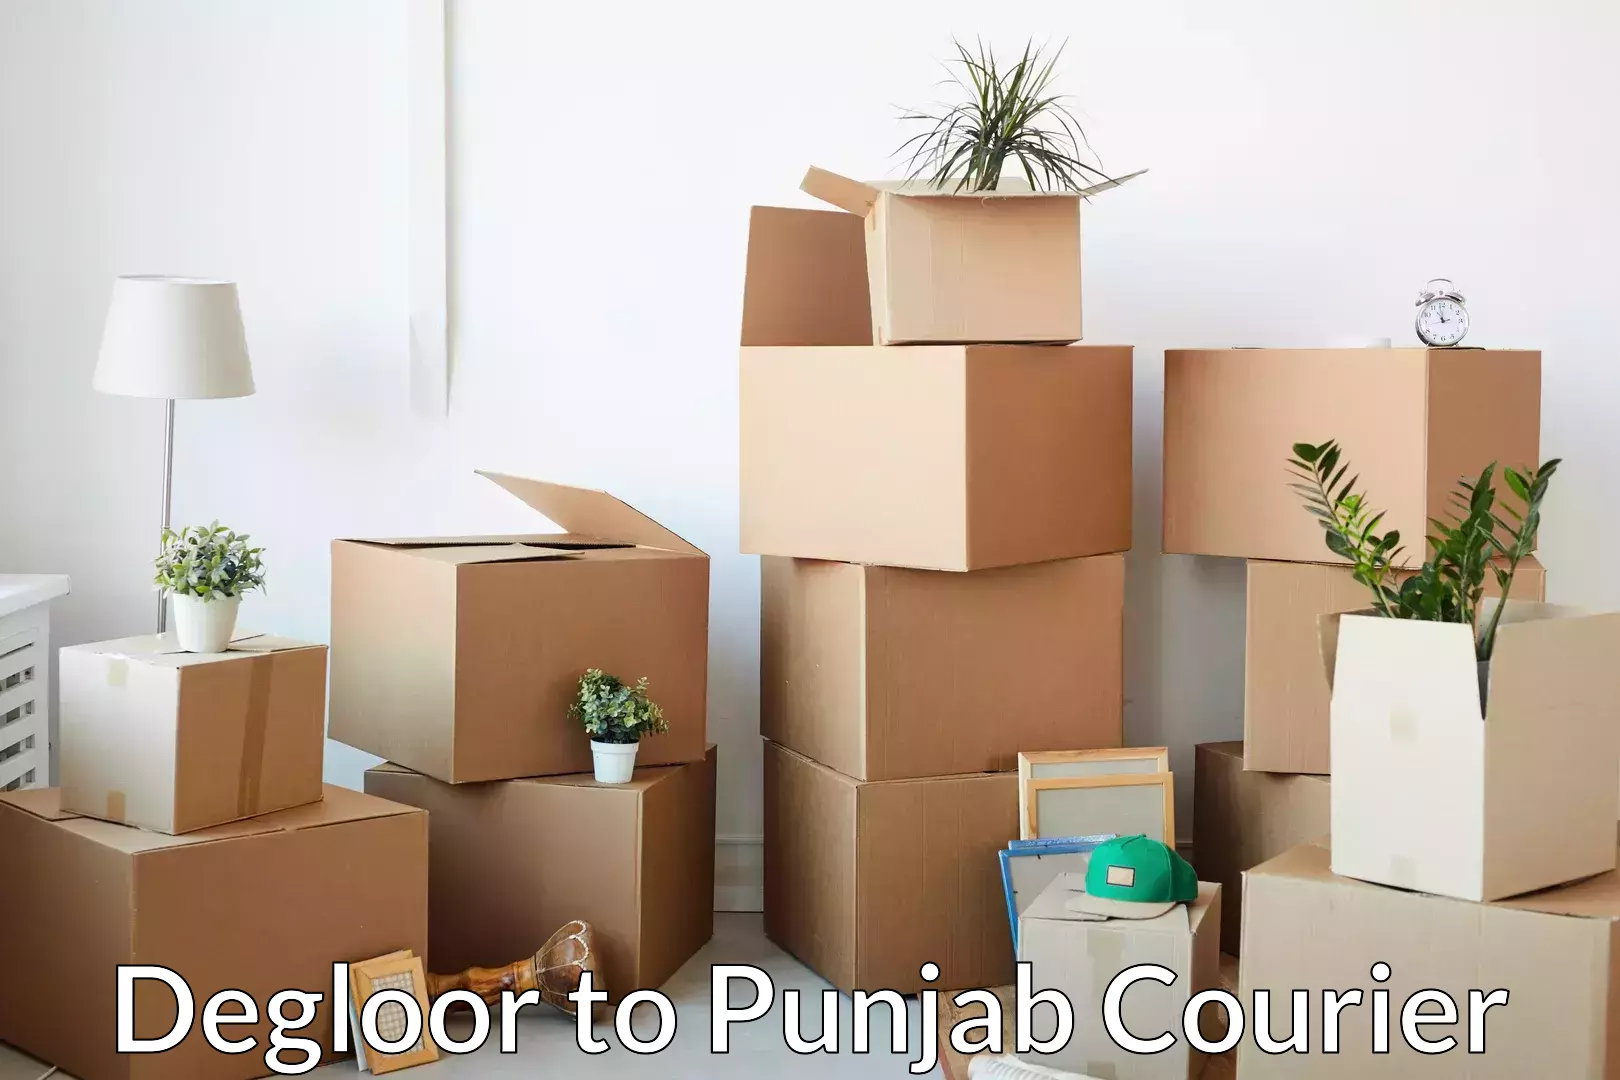 Full-service household moving Degloor to Punjab